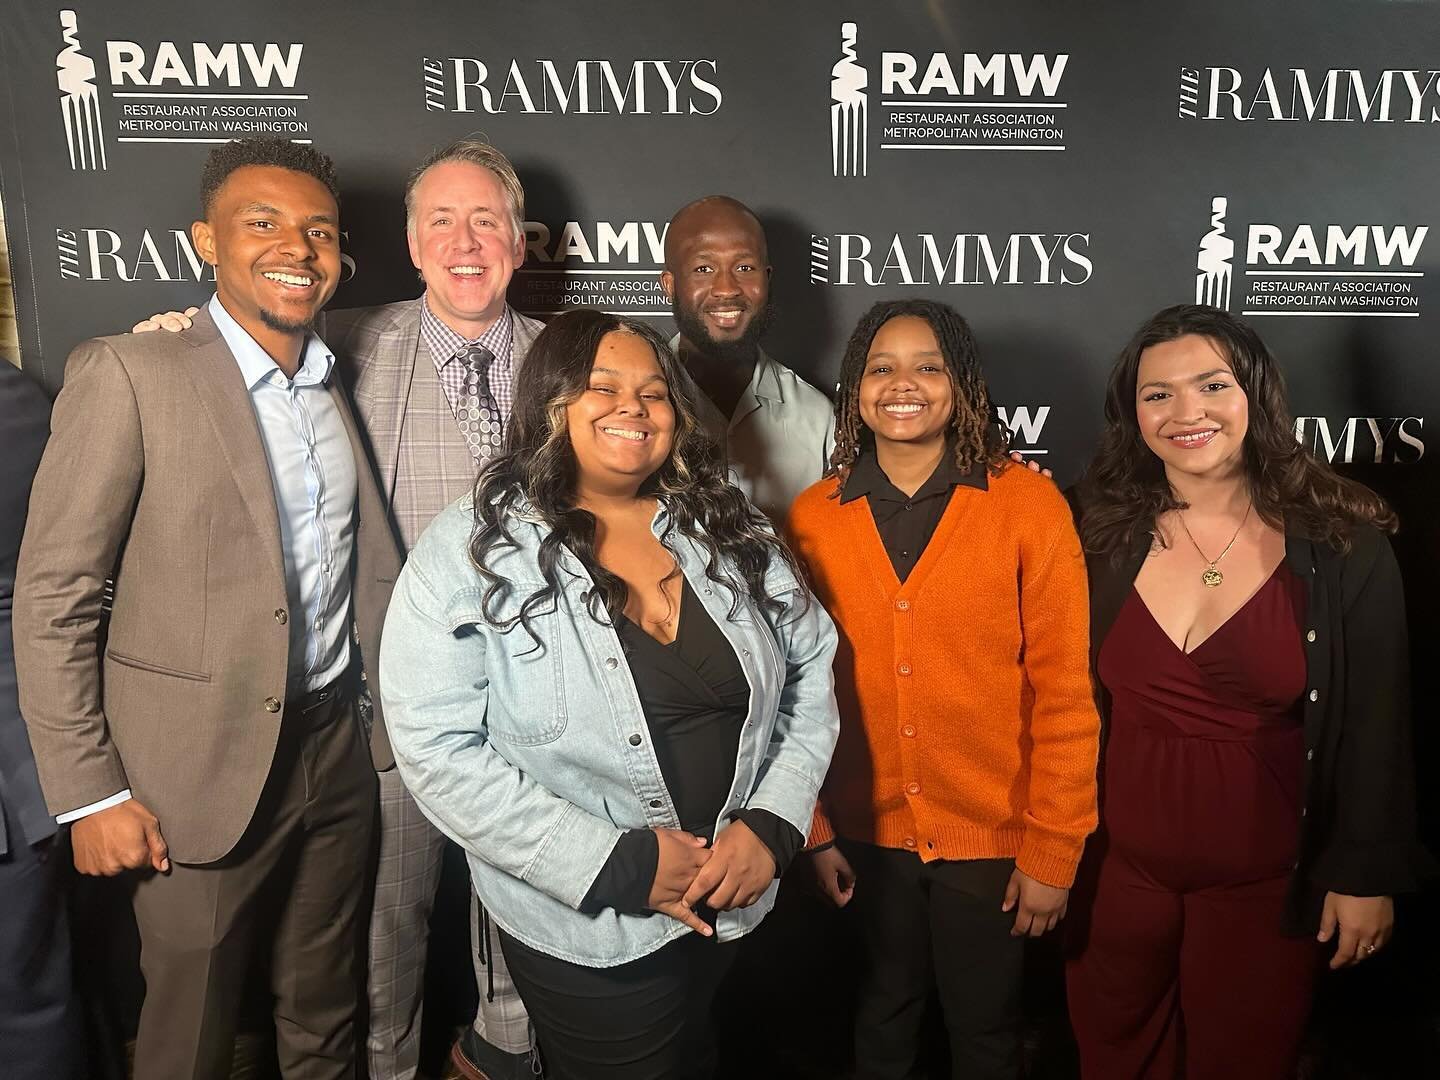 Today is a huge day in the DMV! Not because of the eclipse, though that was pretty dang cool. But because, after months of anticipation, it&rsquo;s finally time for the Restaurant Association of Metropolitan Washington&rsquo;s 2024 RAMMYS nominees to